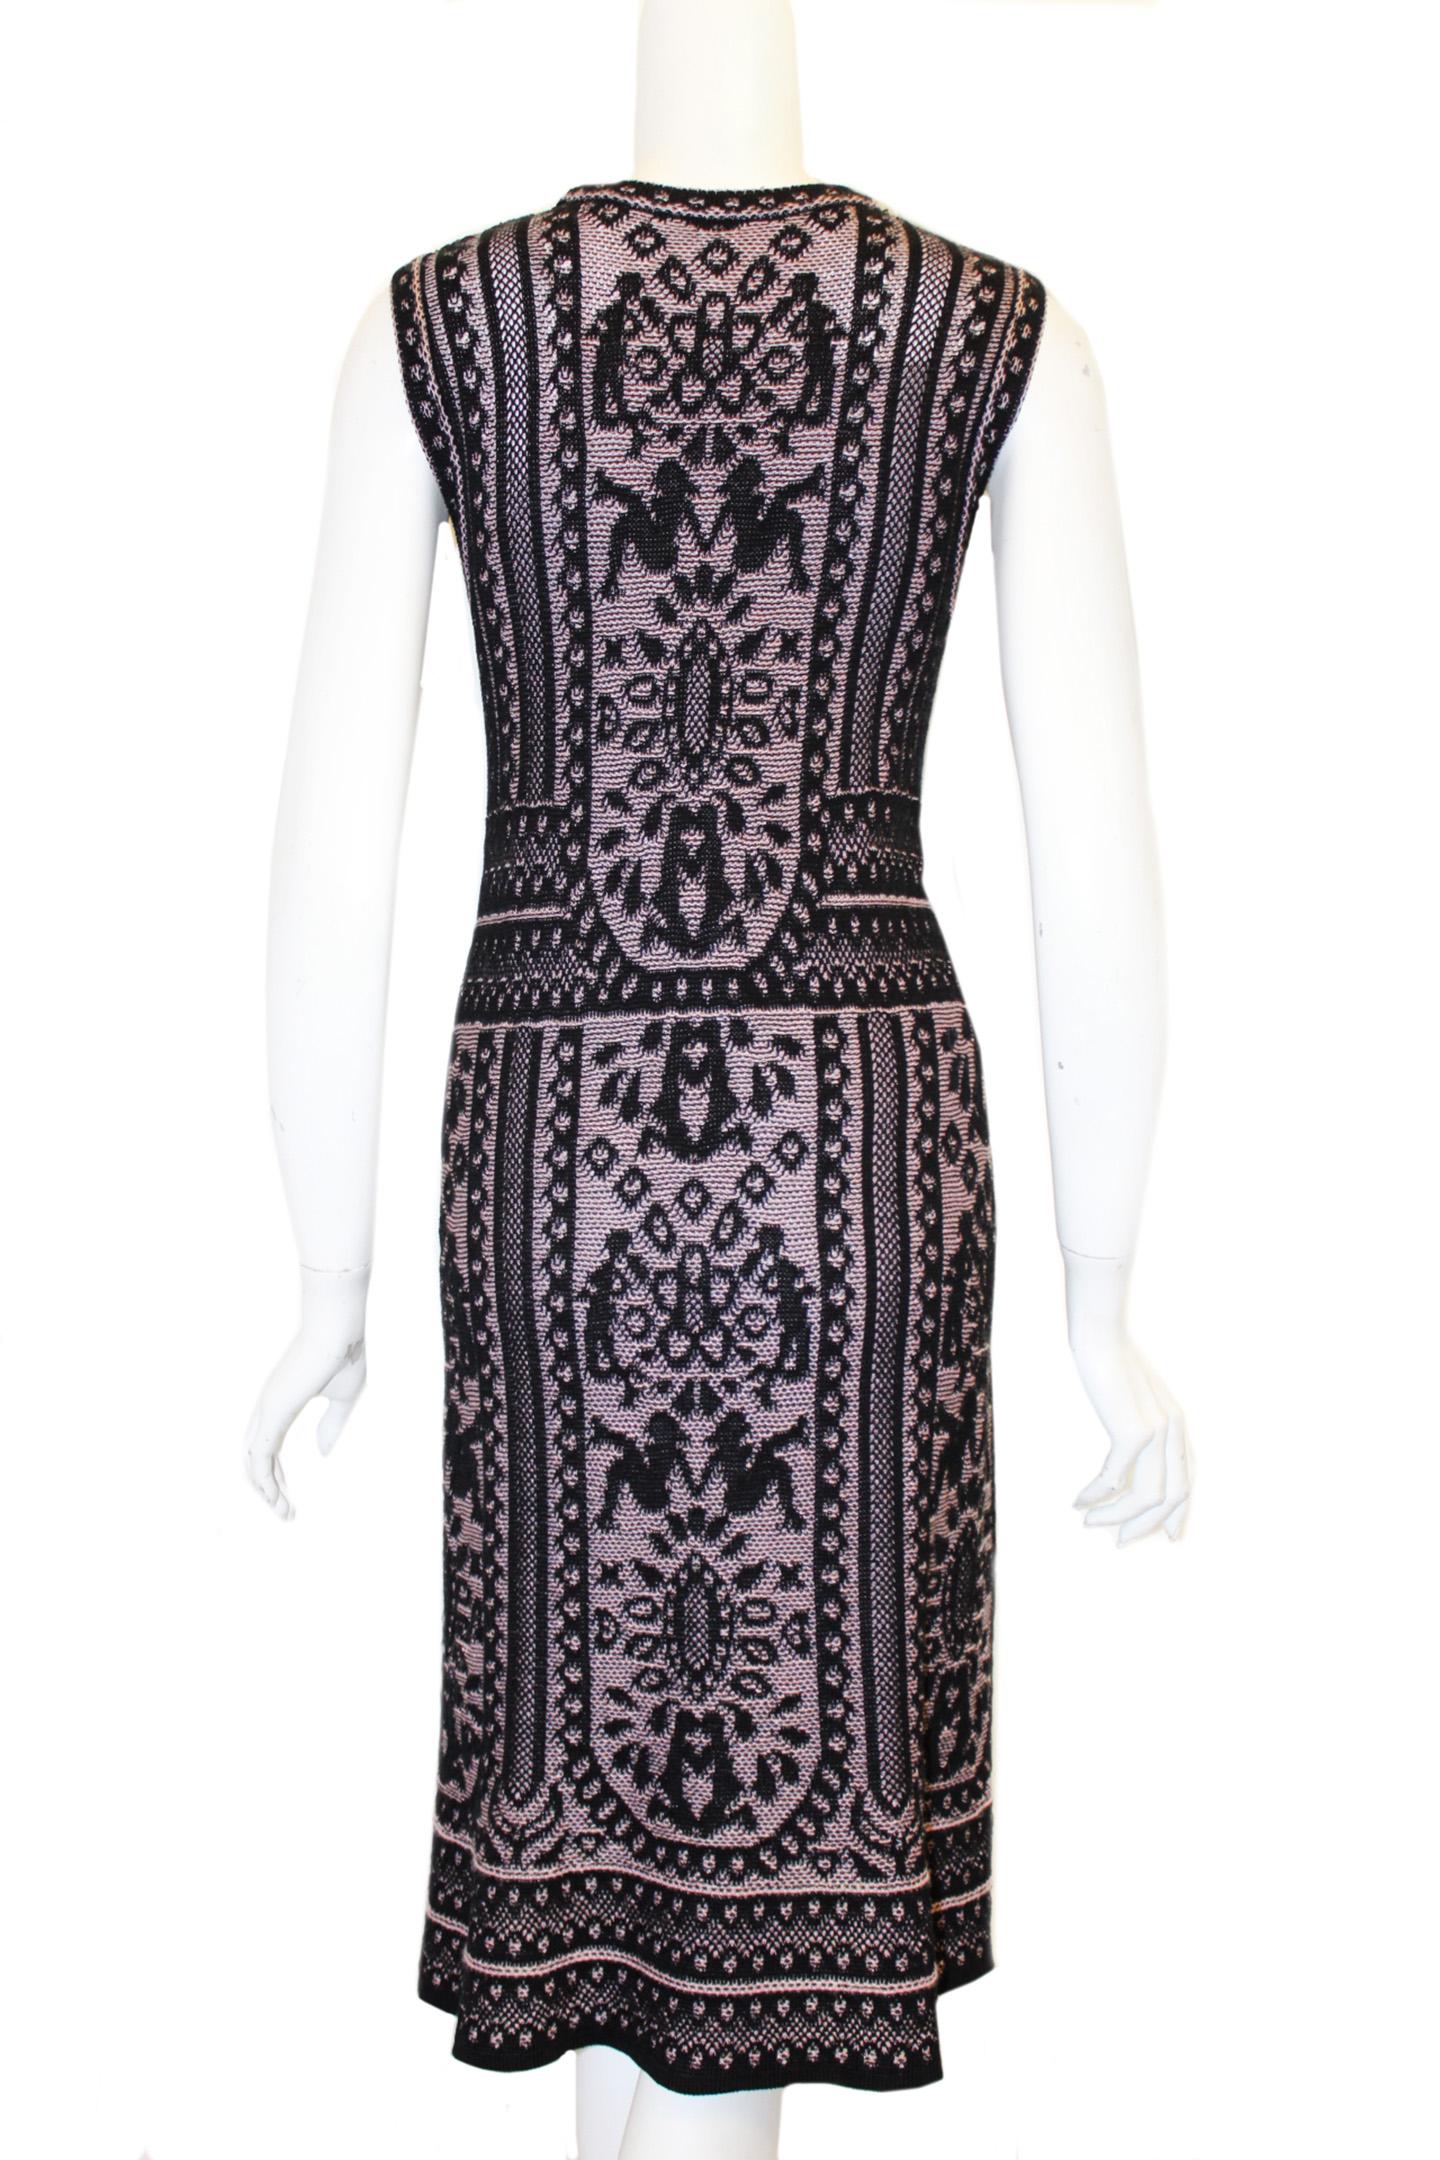 Missoni Rose & Black Sleeveless Knit Dress In Excellent Condition For Sale In Palm Beach, FL